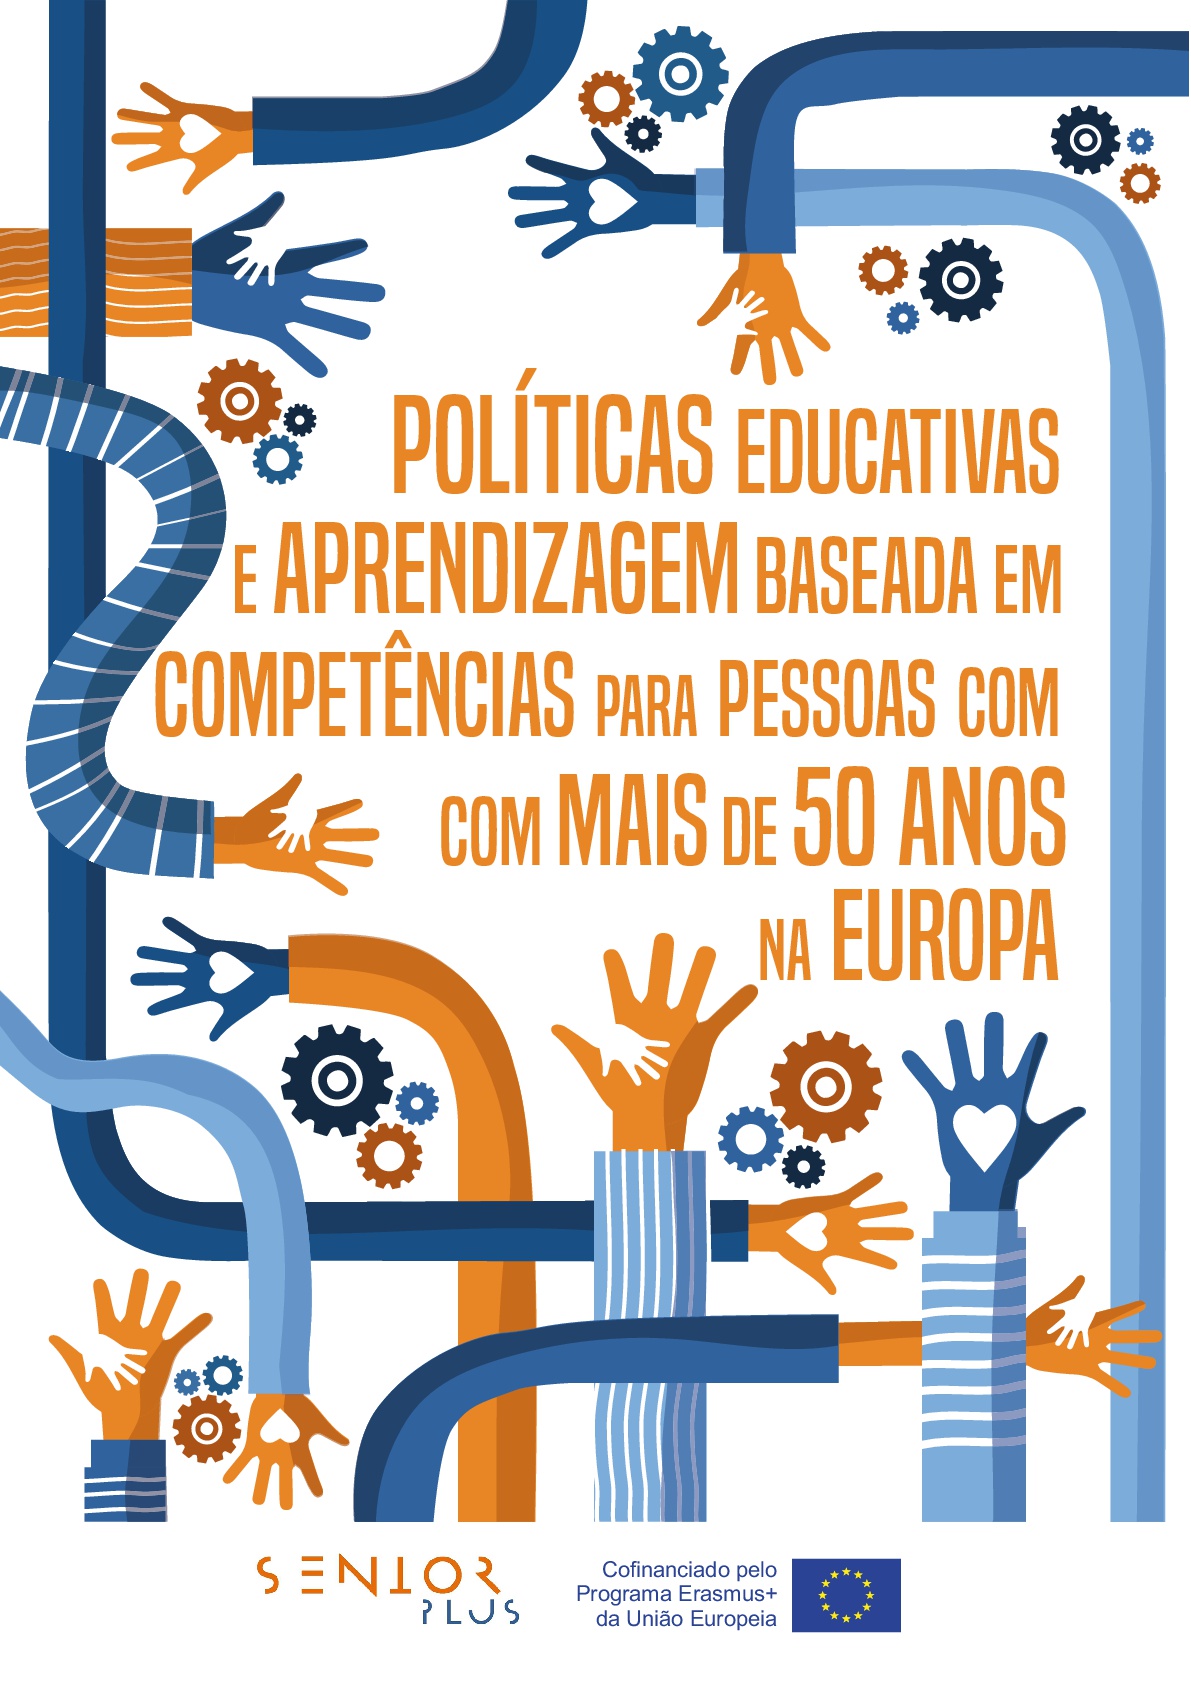 (PT) Education Policies and Competence based learning for over 50s in Europe